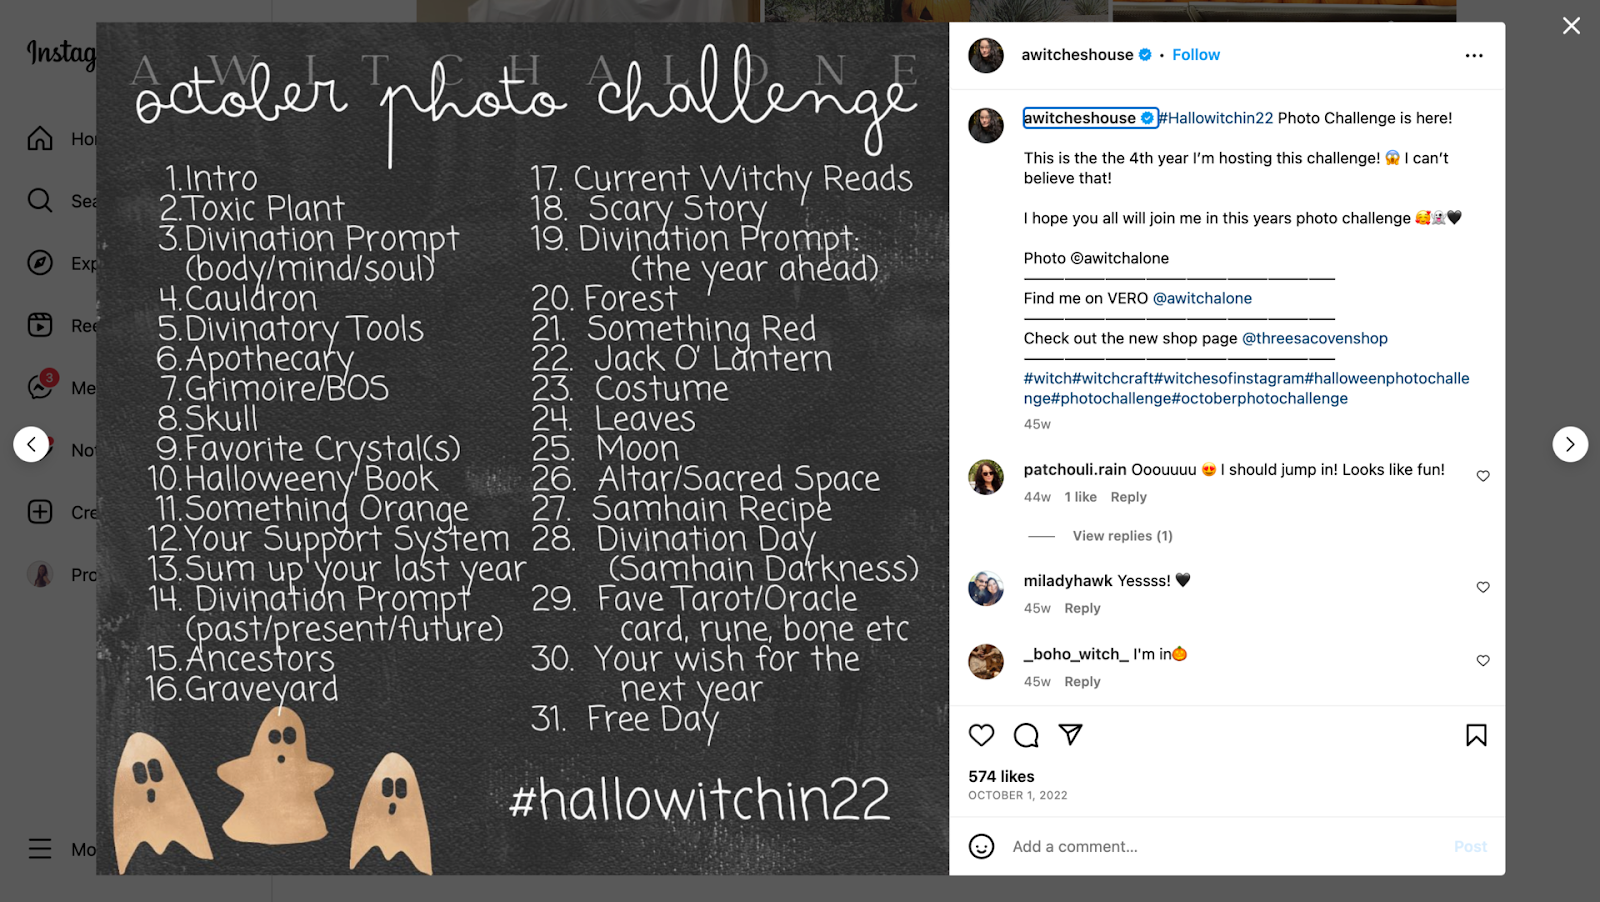 The Halloween Instagram photo challenge image shows an example of using a set duration and frequency for your Instagram photo challenge.